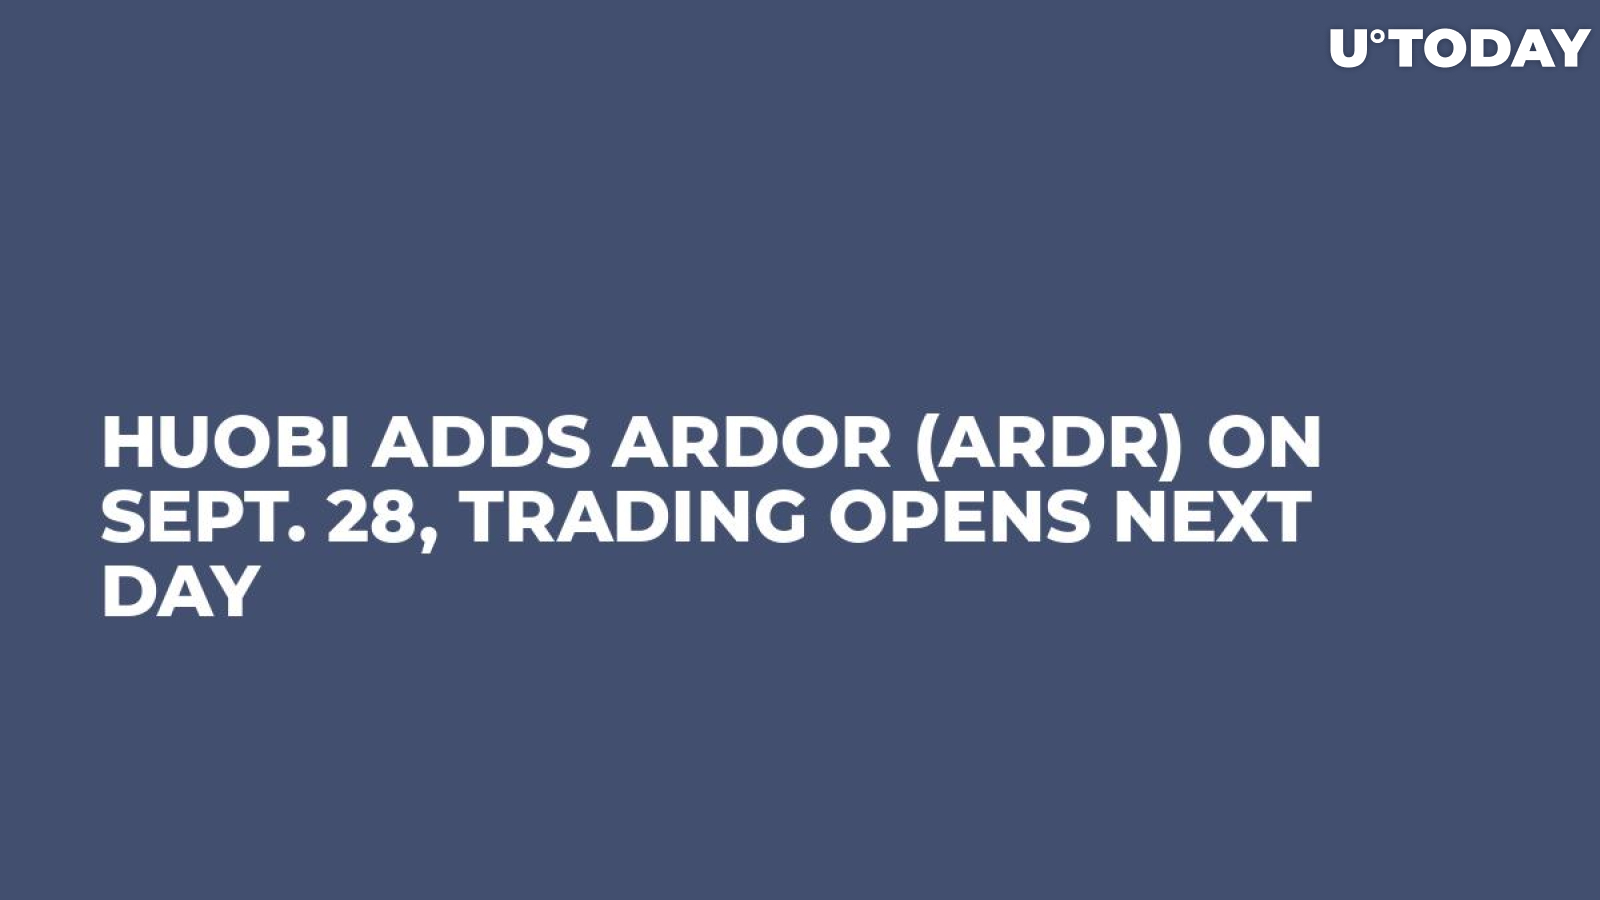 Huobi Adds Ardor (ARDR) on Sept. 28, Trading Opens Next Day